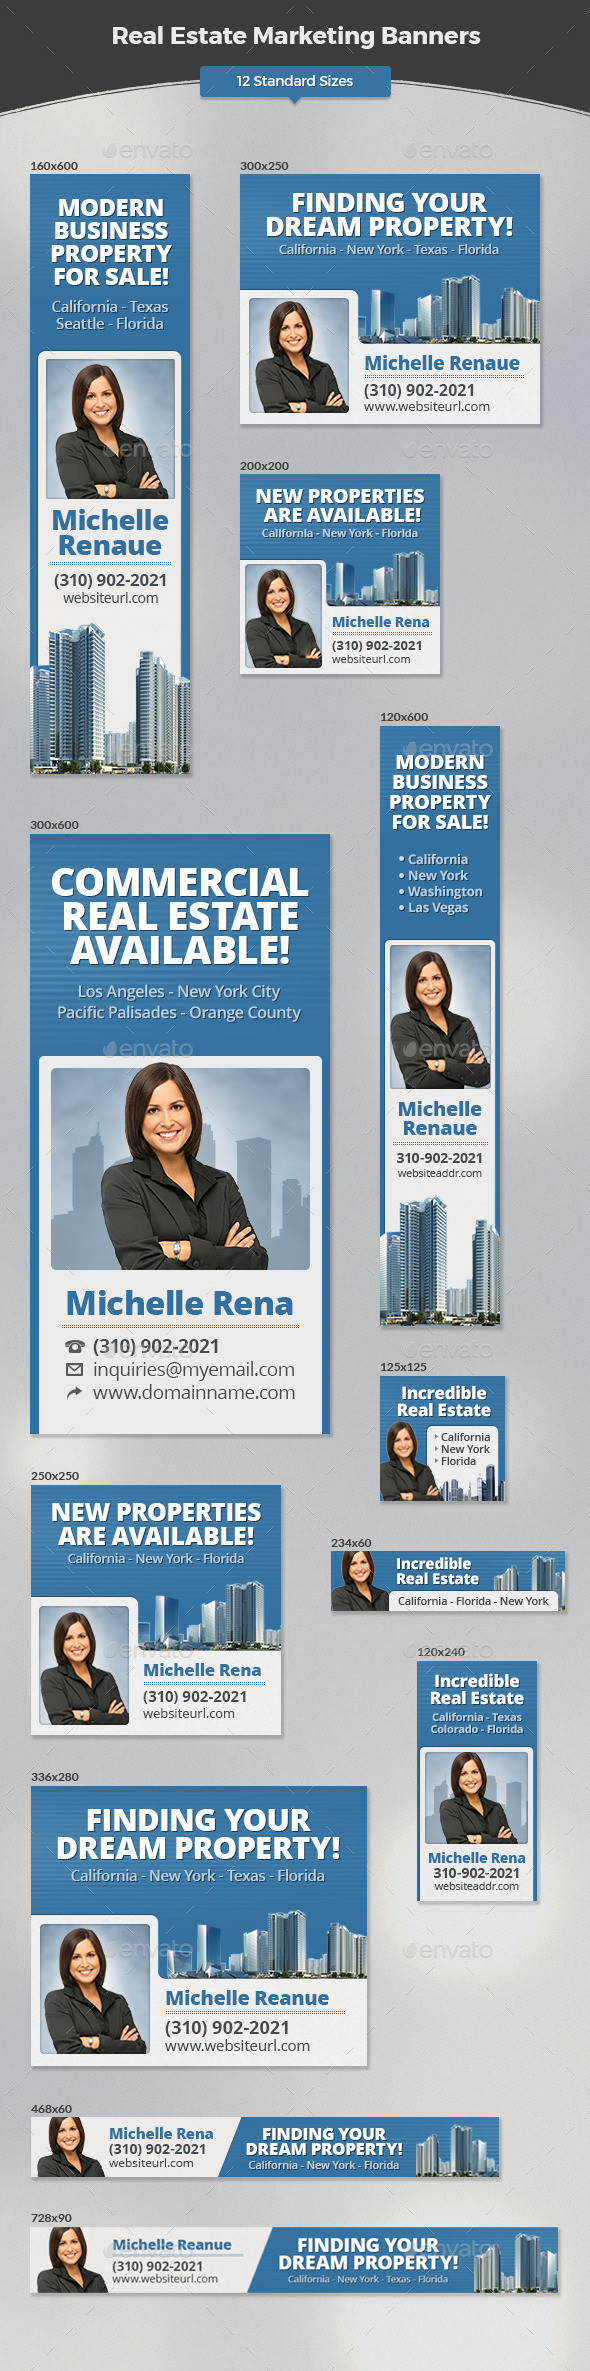 Real estate marketing banners preview